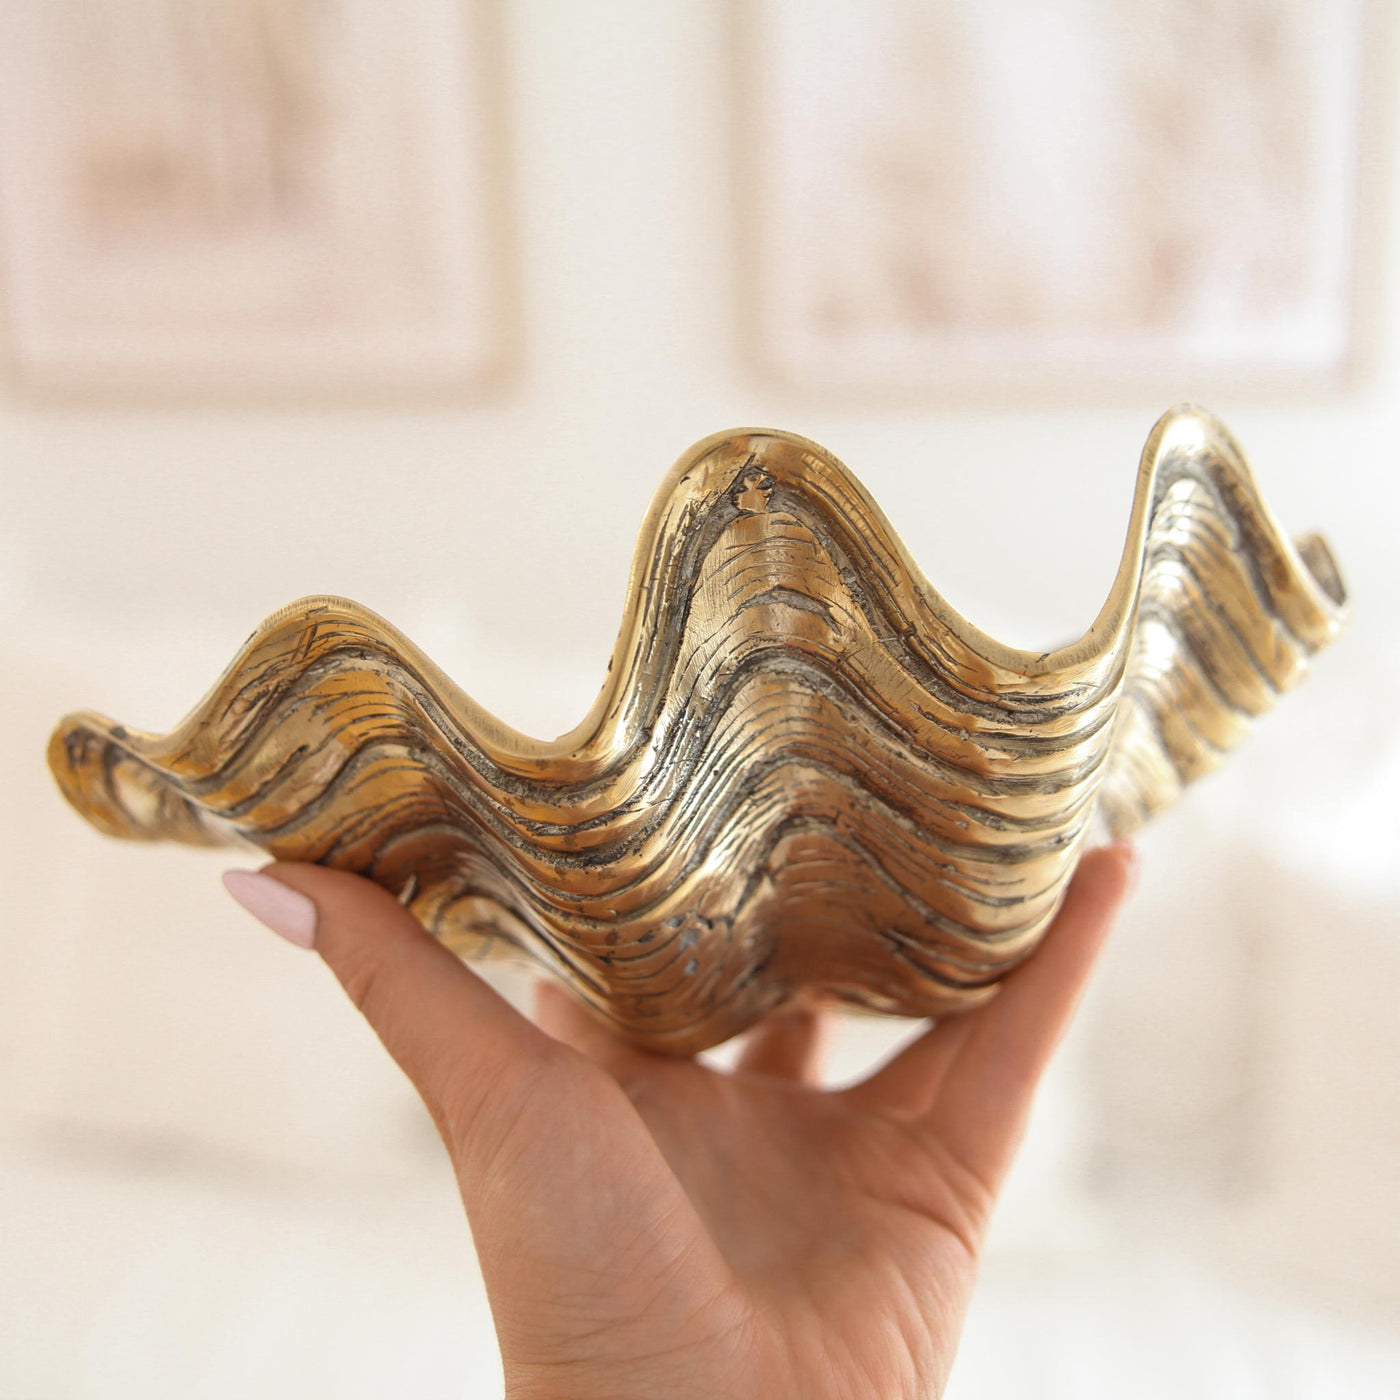 Brass Clam Shell Decoration